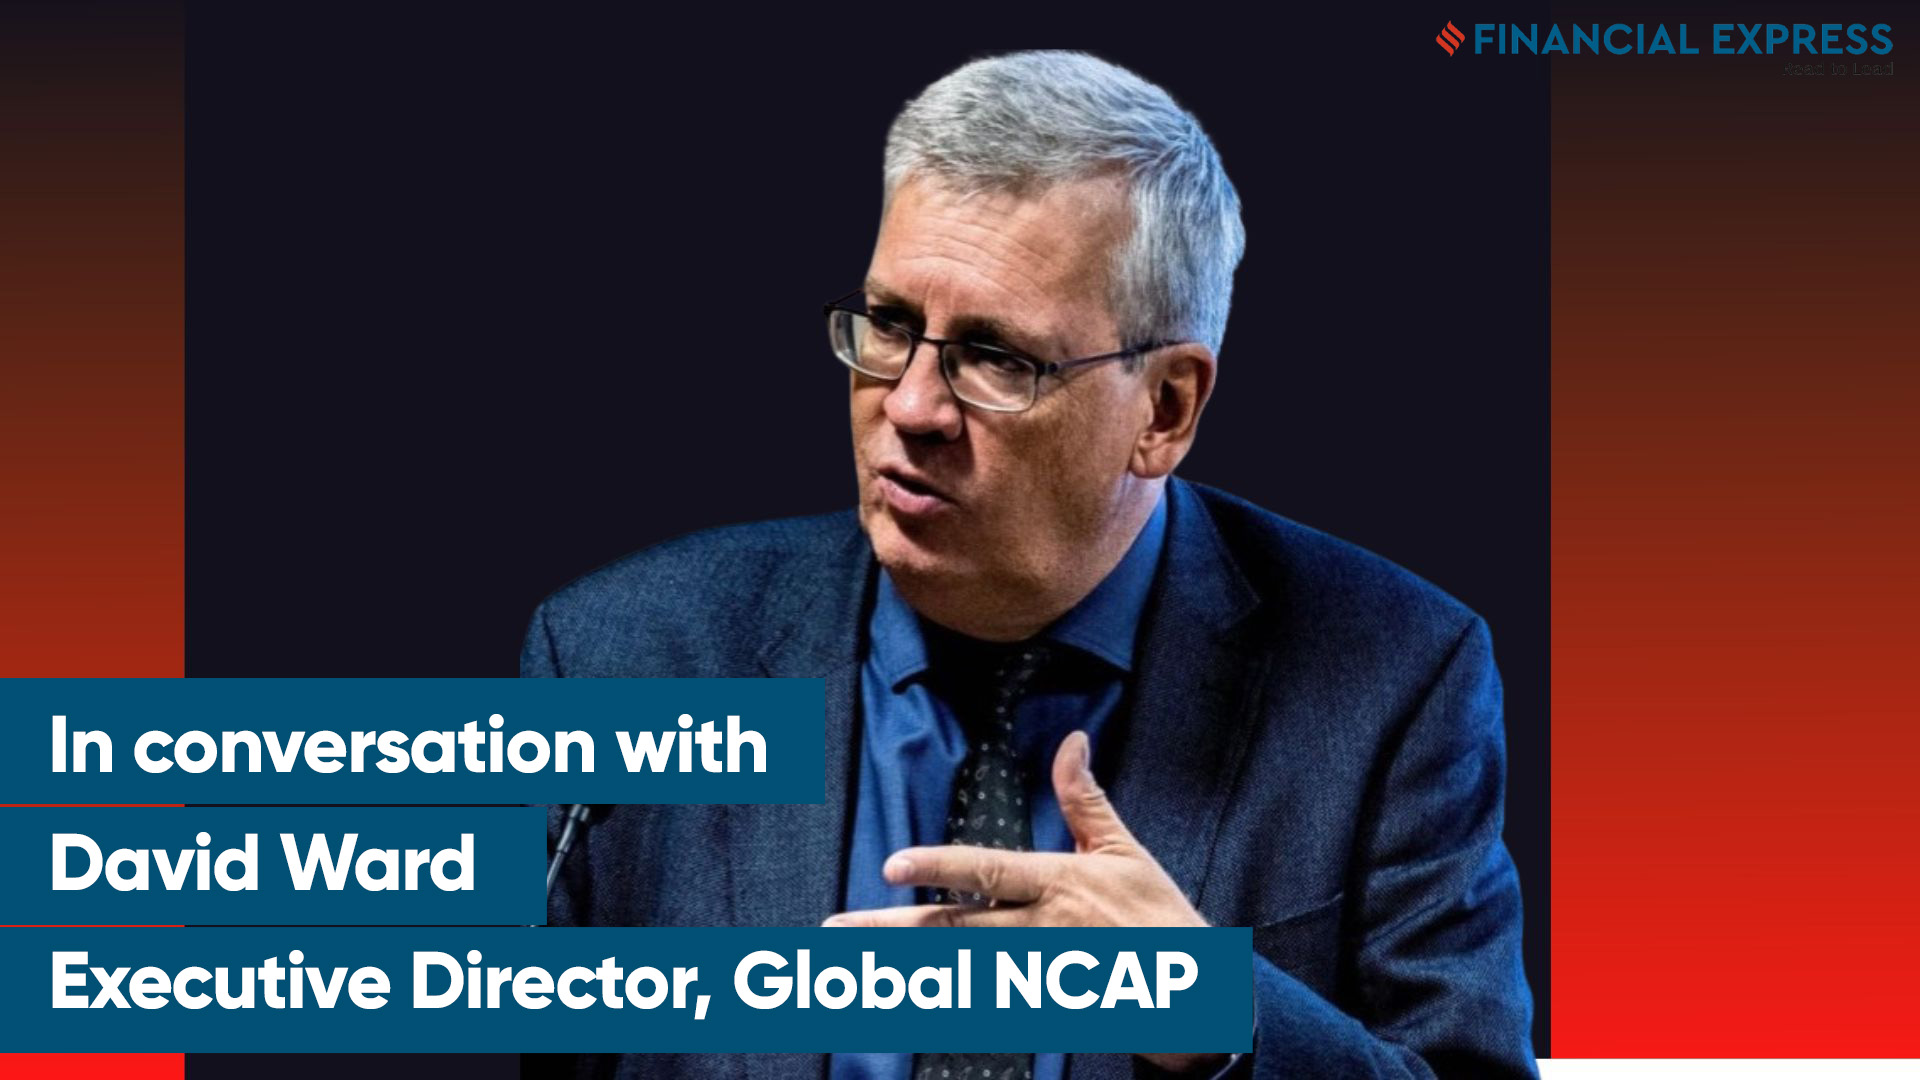 Global NCAP has been a catalyst for Bharat NCAP and not an alternative says David Ward